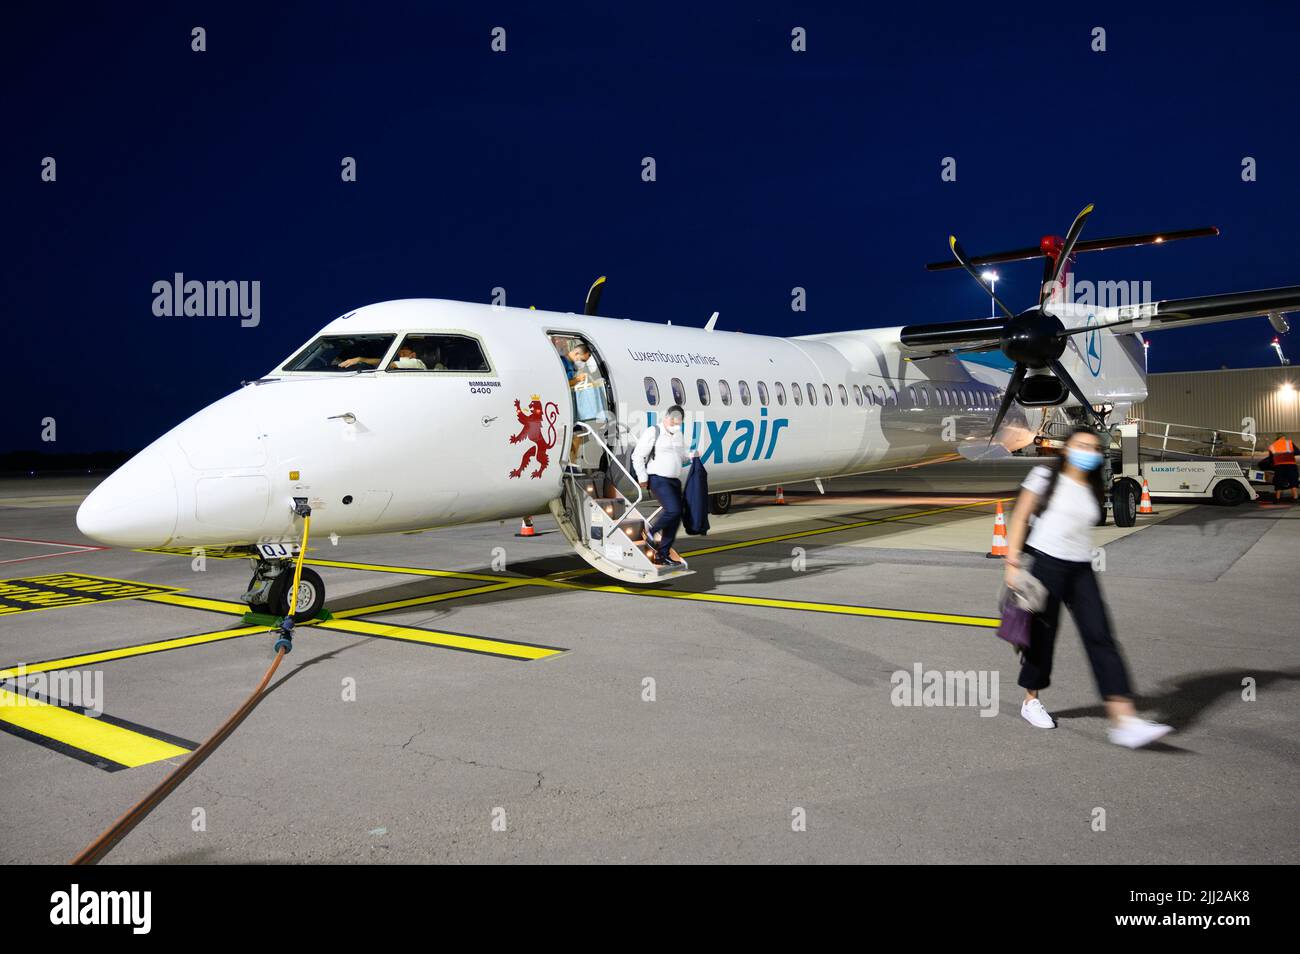 Passengers getting off a landed Luxair (Luxembourg Airlines) airplane (Bombardier Q400) at the Luxembourg Airport. Stock Photo